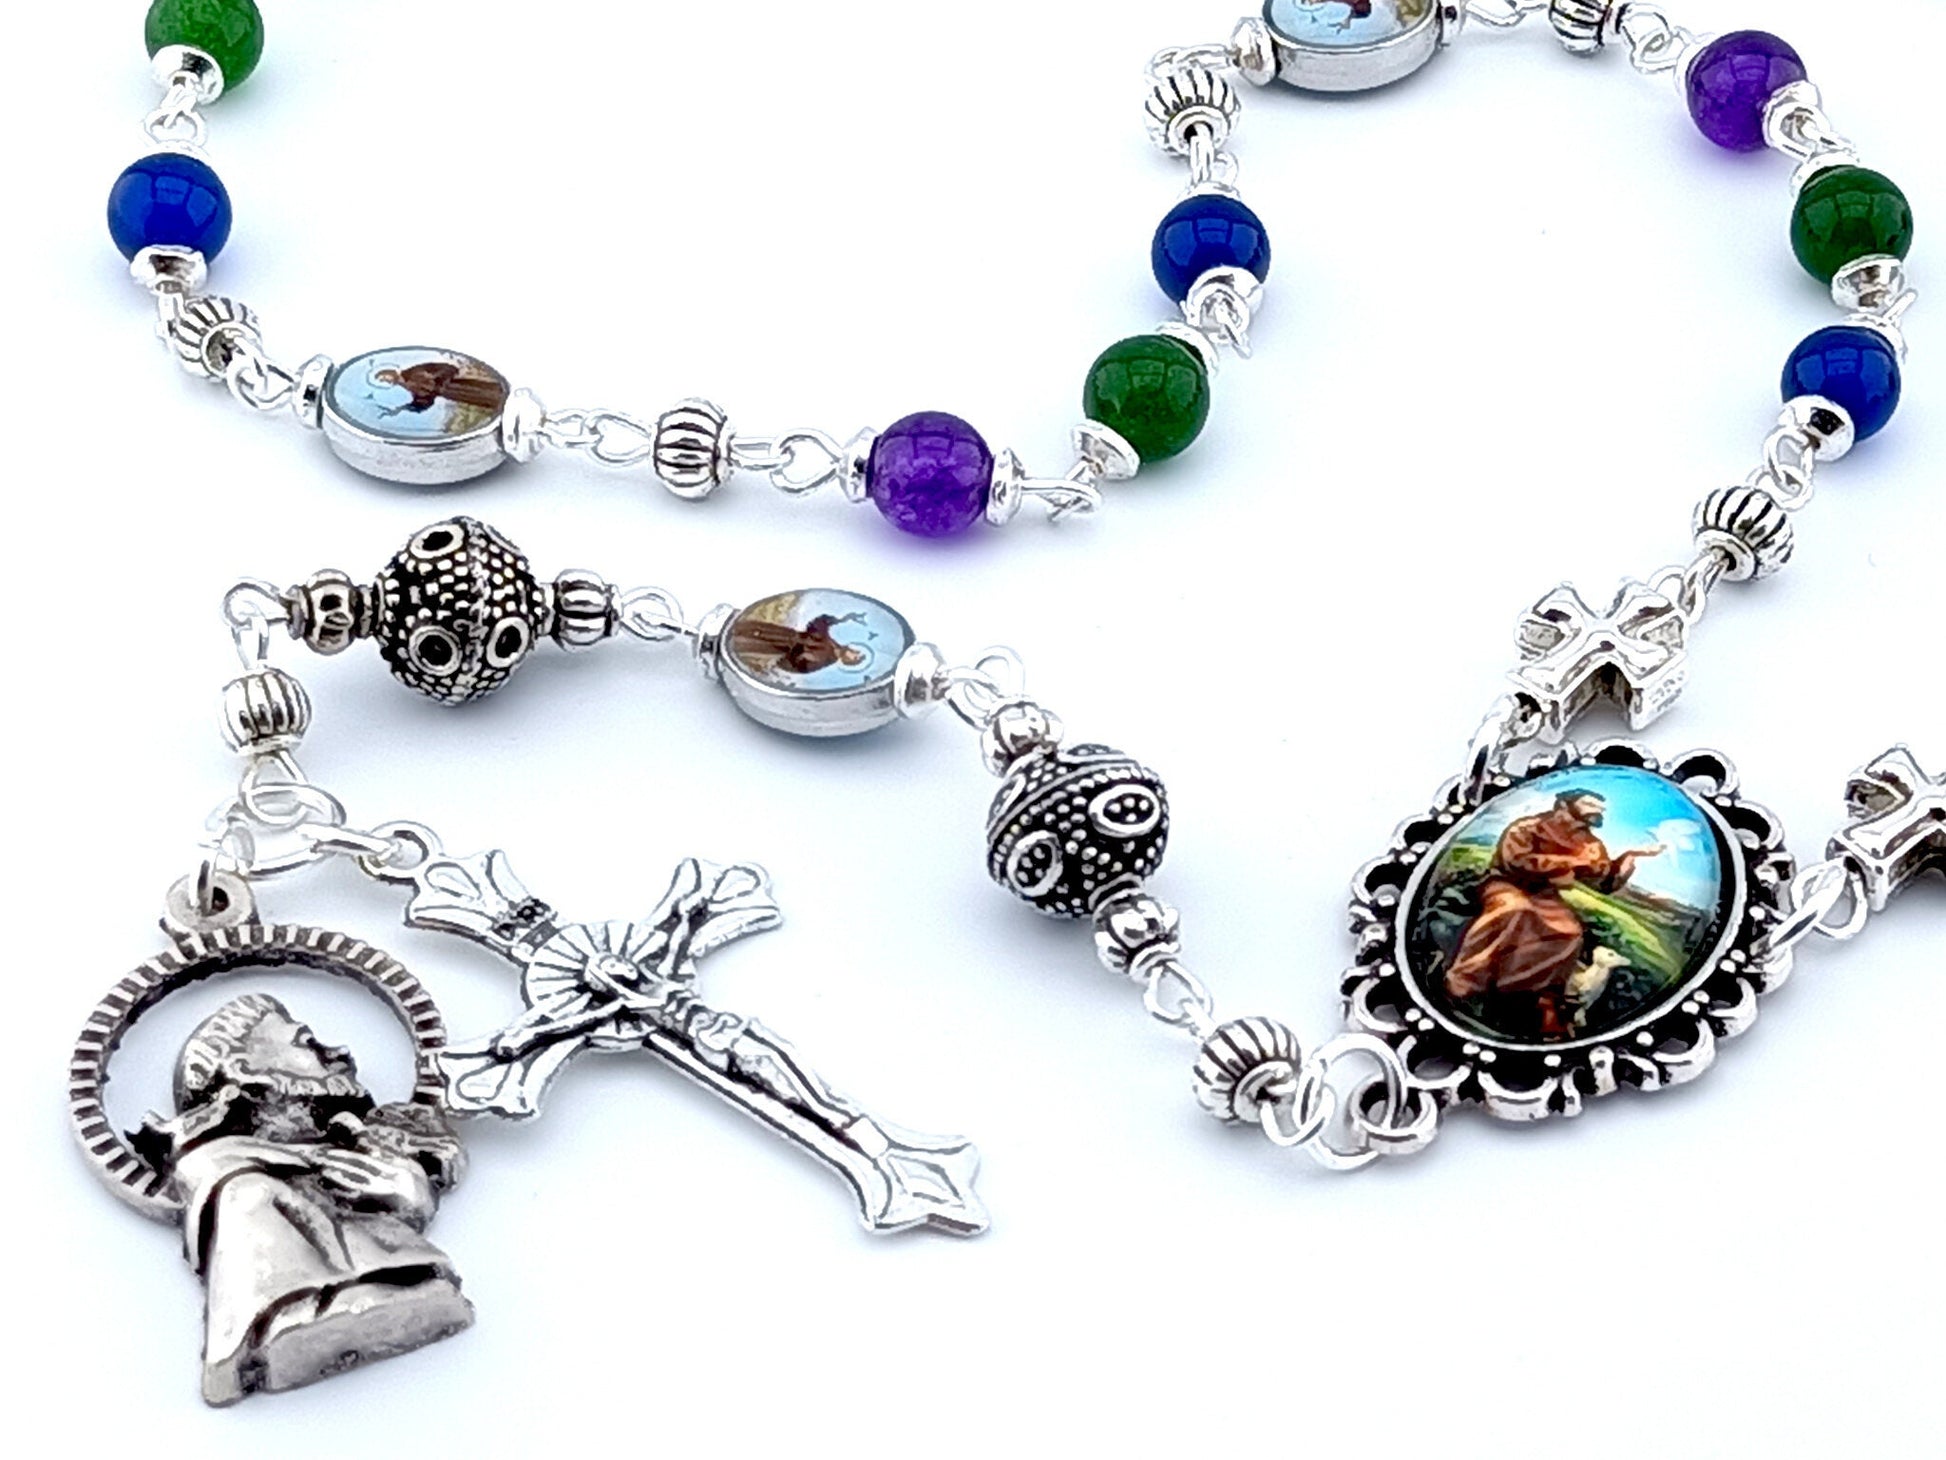 Saint Francis of Assisi unique rosary beads prayer chaplet with agate gemstone beads, silver crucifix, beads and picture medals.